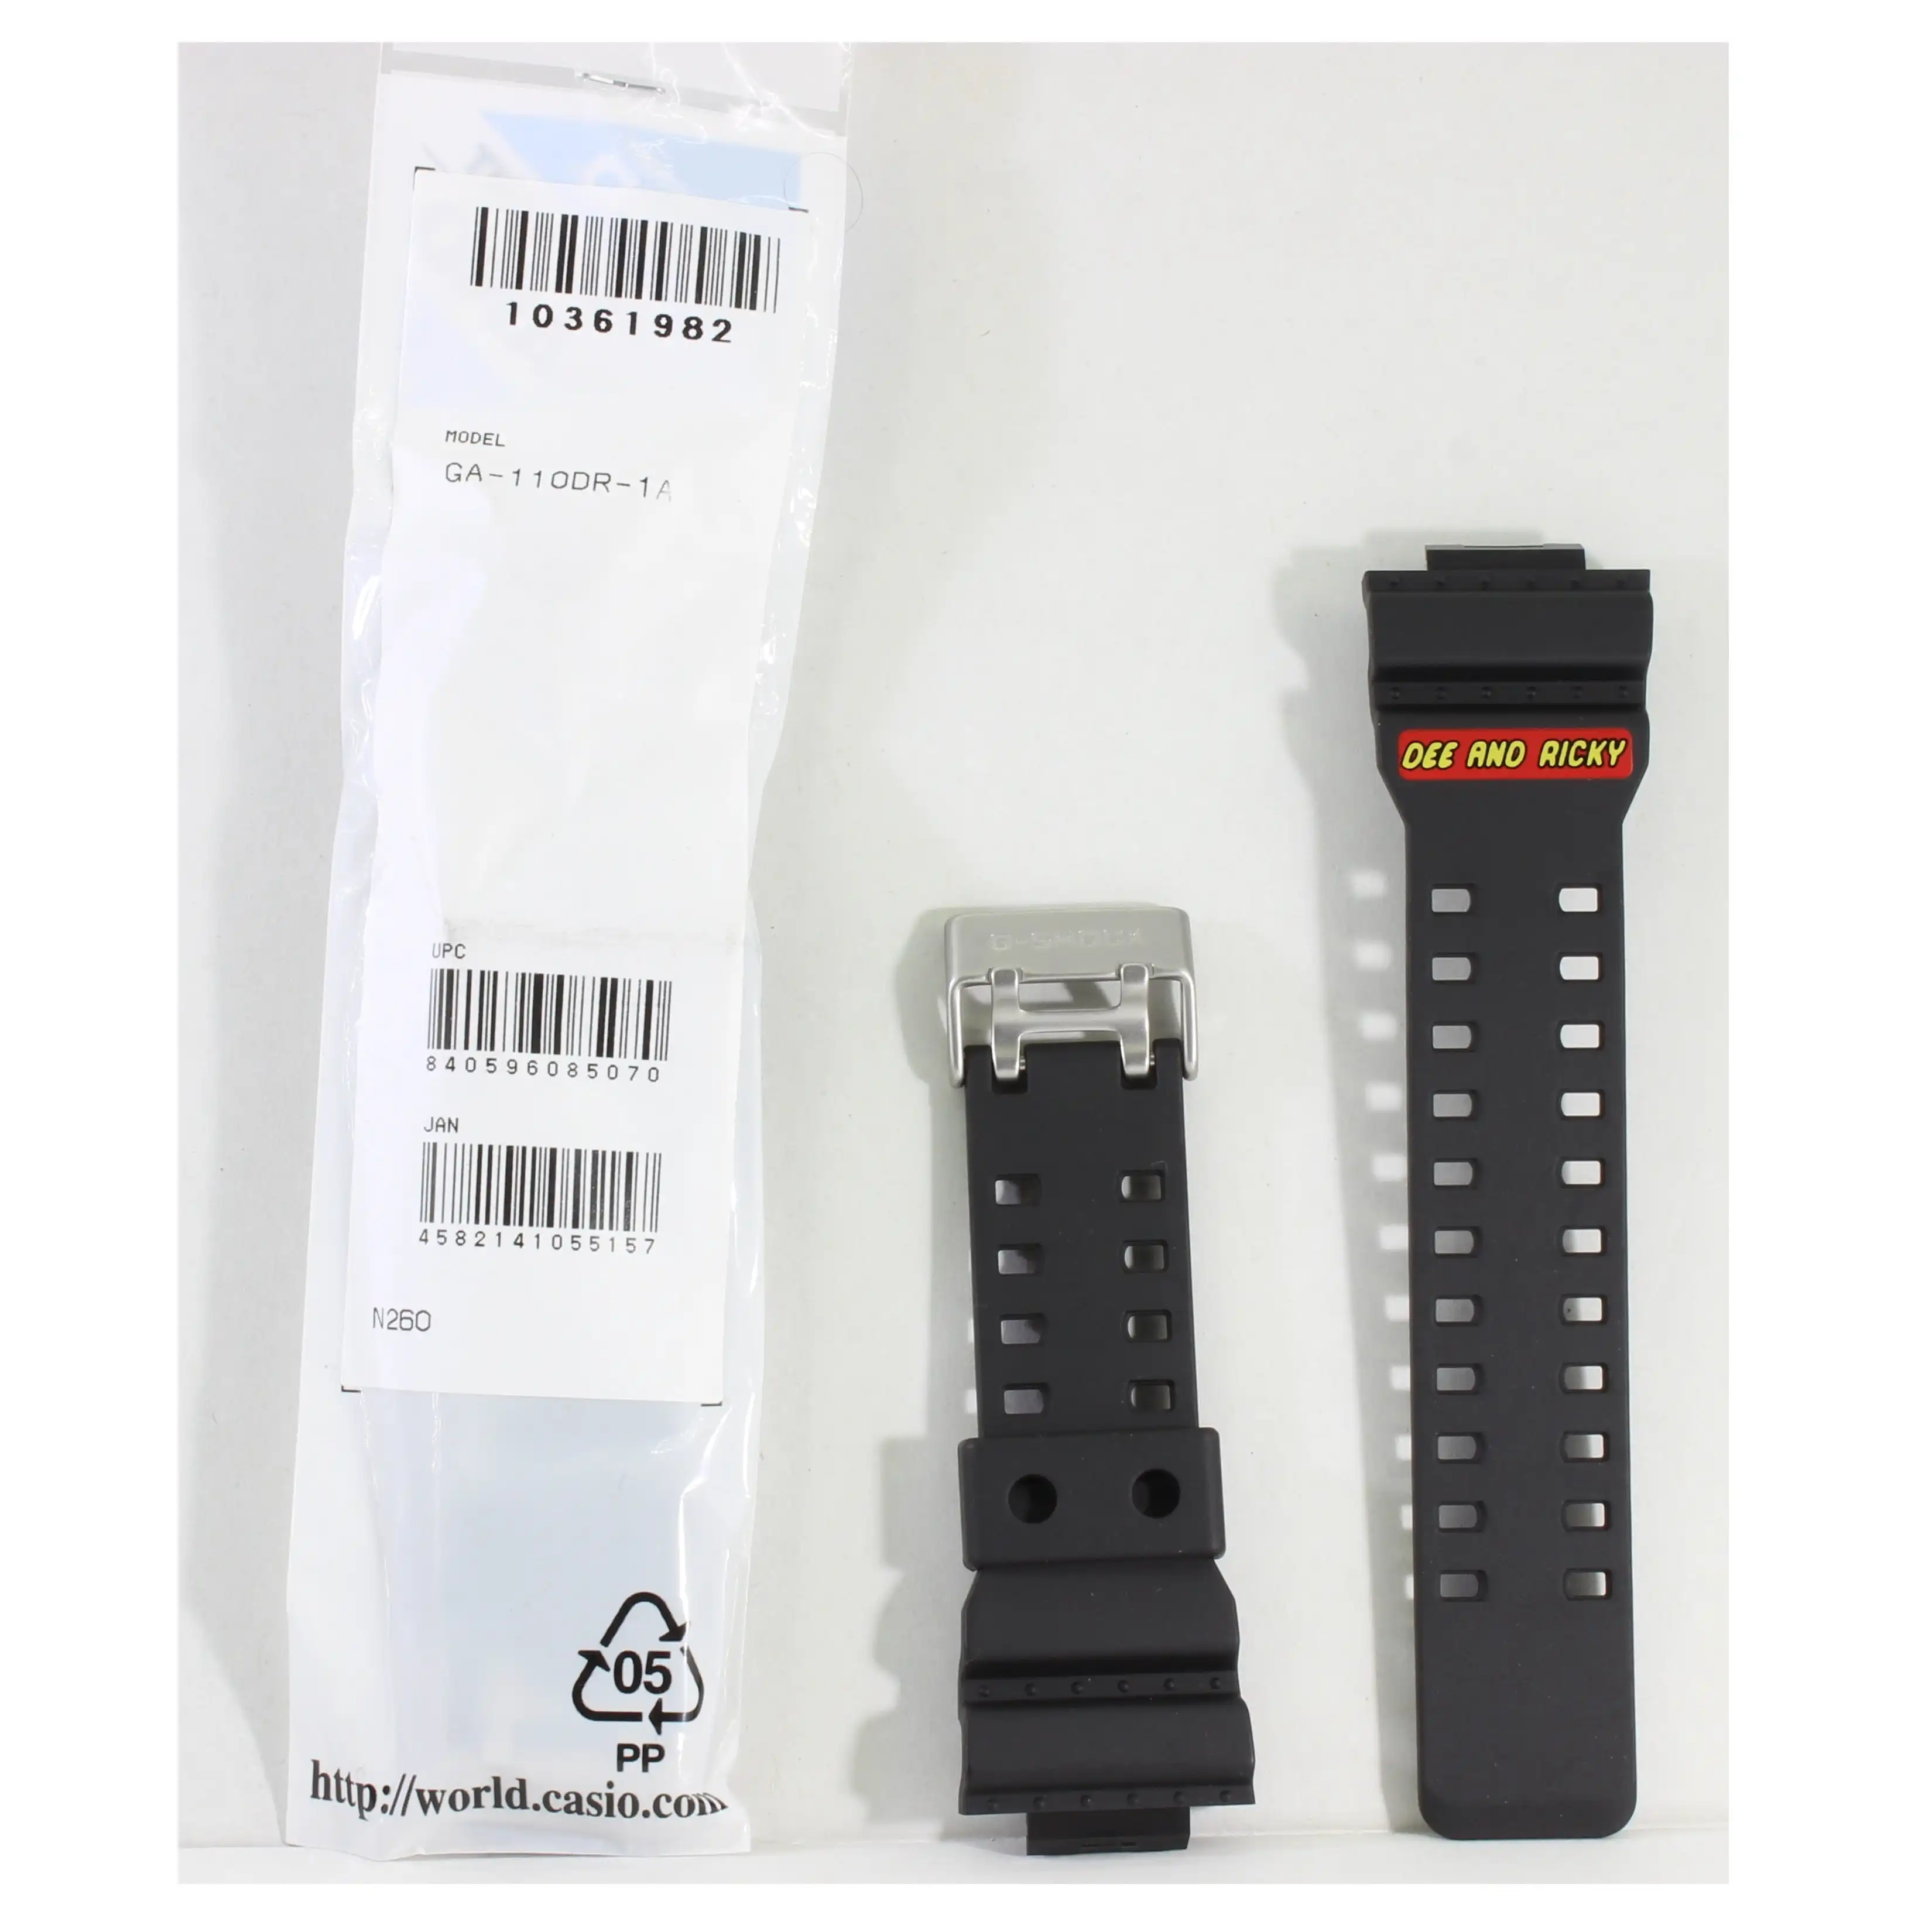 Casio G-Shock Matte Black Genuine Replacement Strap 10361982 to suit GA-110DR-1A Dee and Ricky